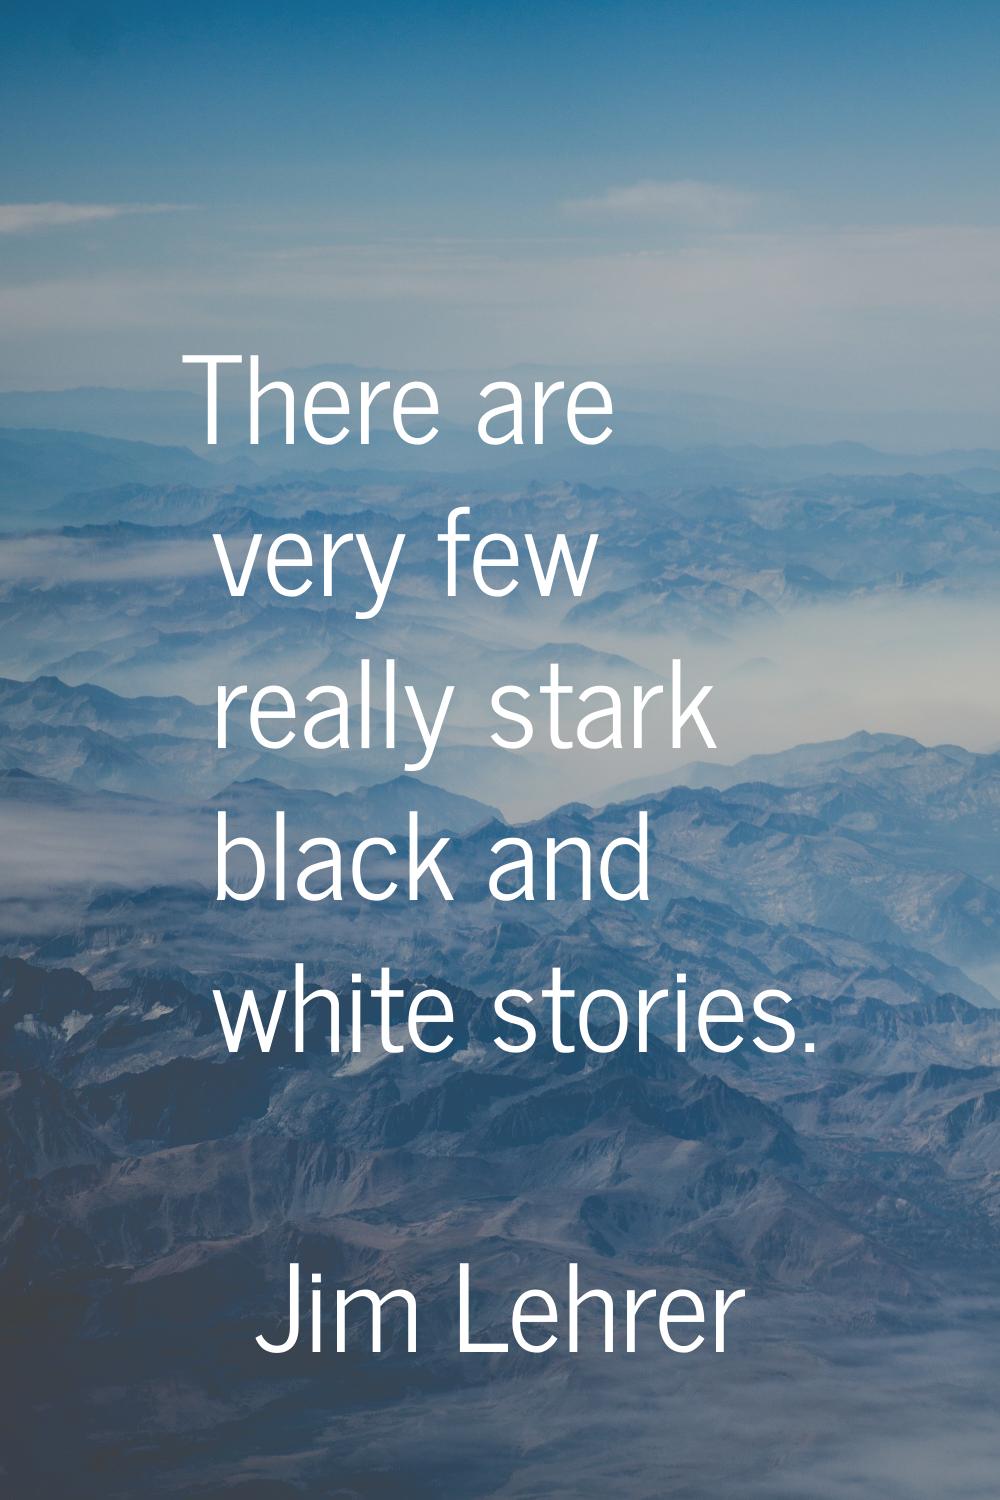 There are very few really stark black and white stories.